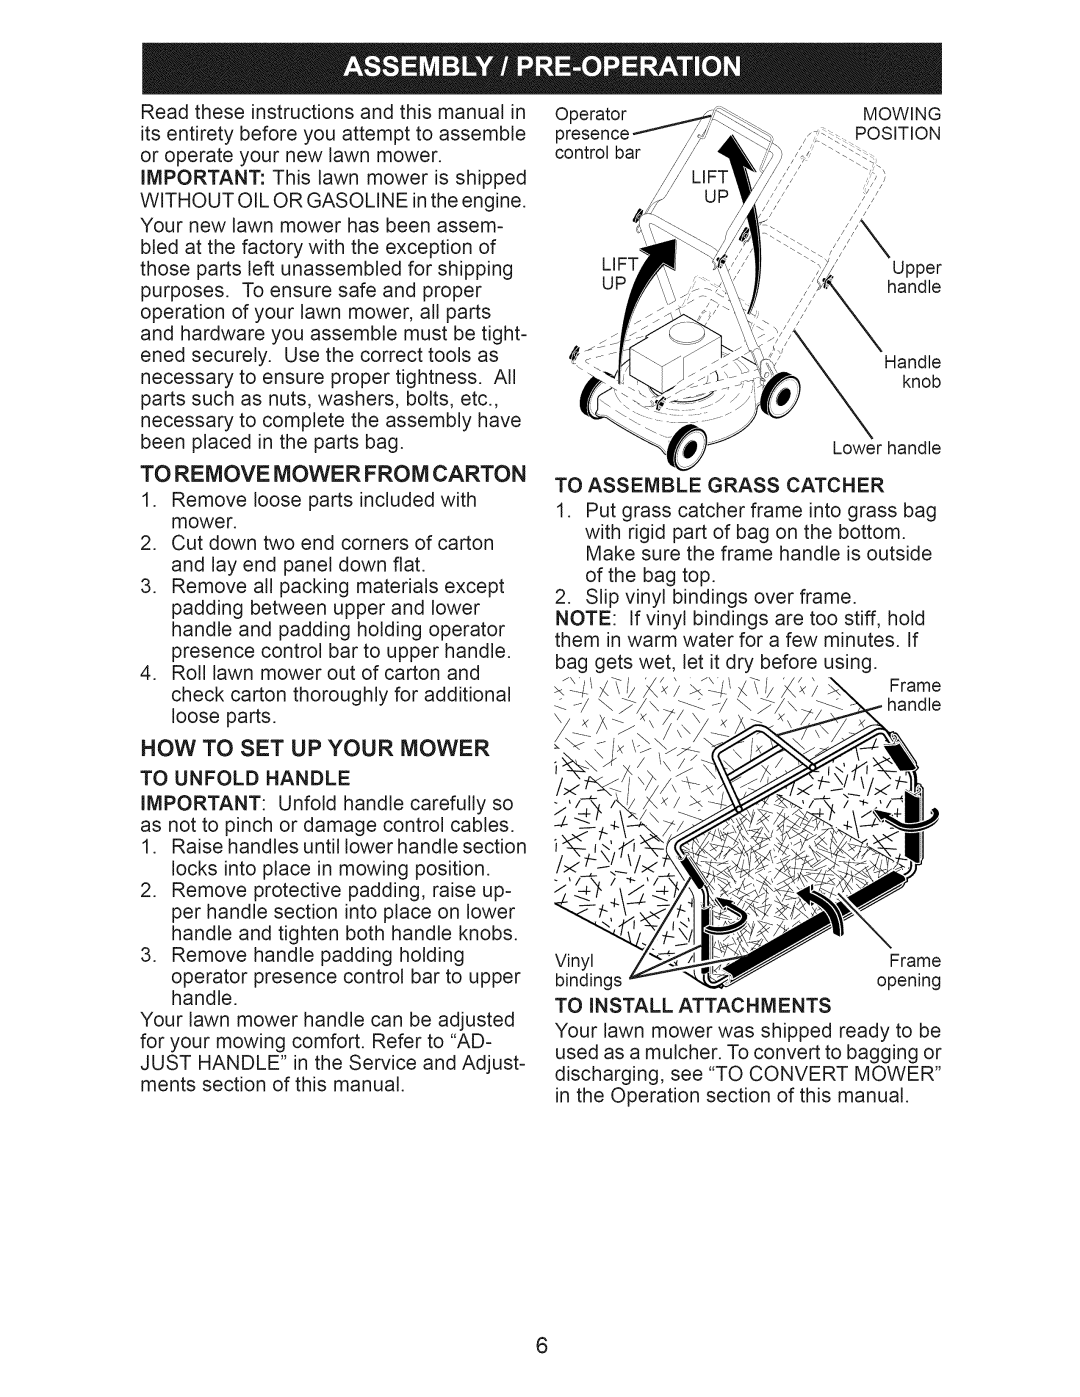 Craftsman 917.389052 owner manual Now To Set Up Your Mower, To Remove Mower From Carton 